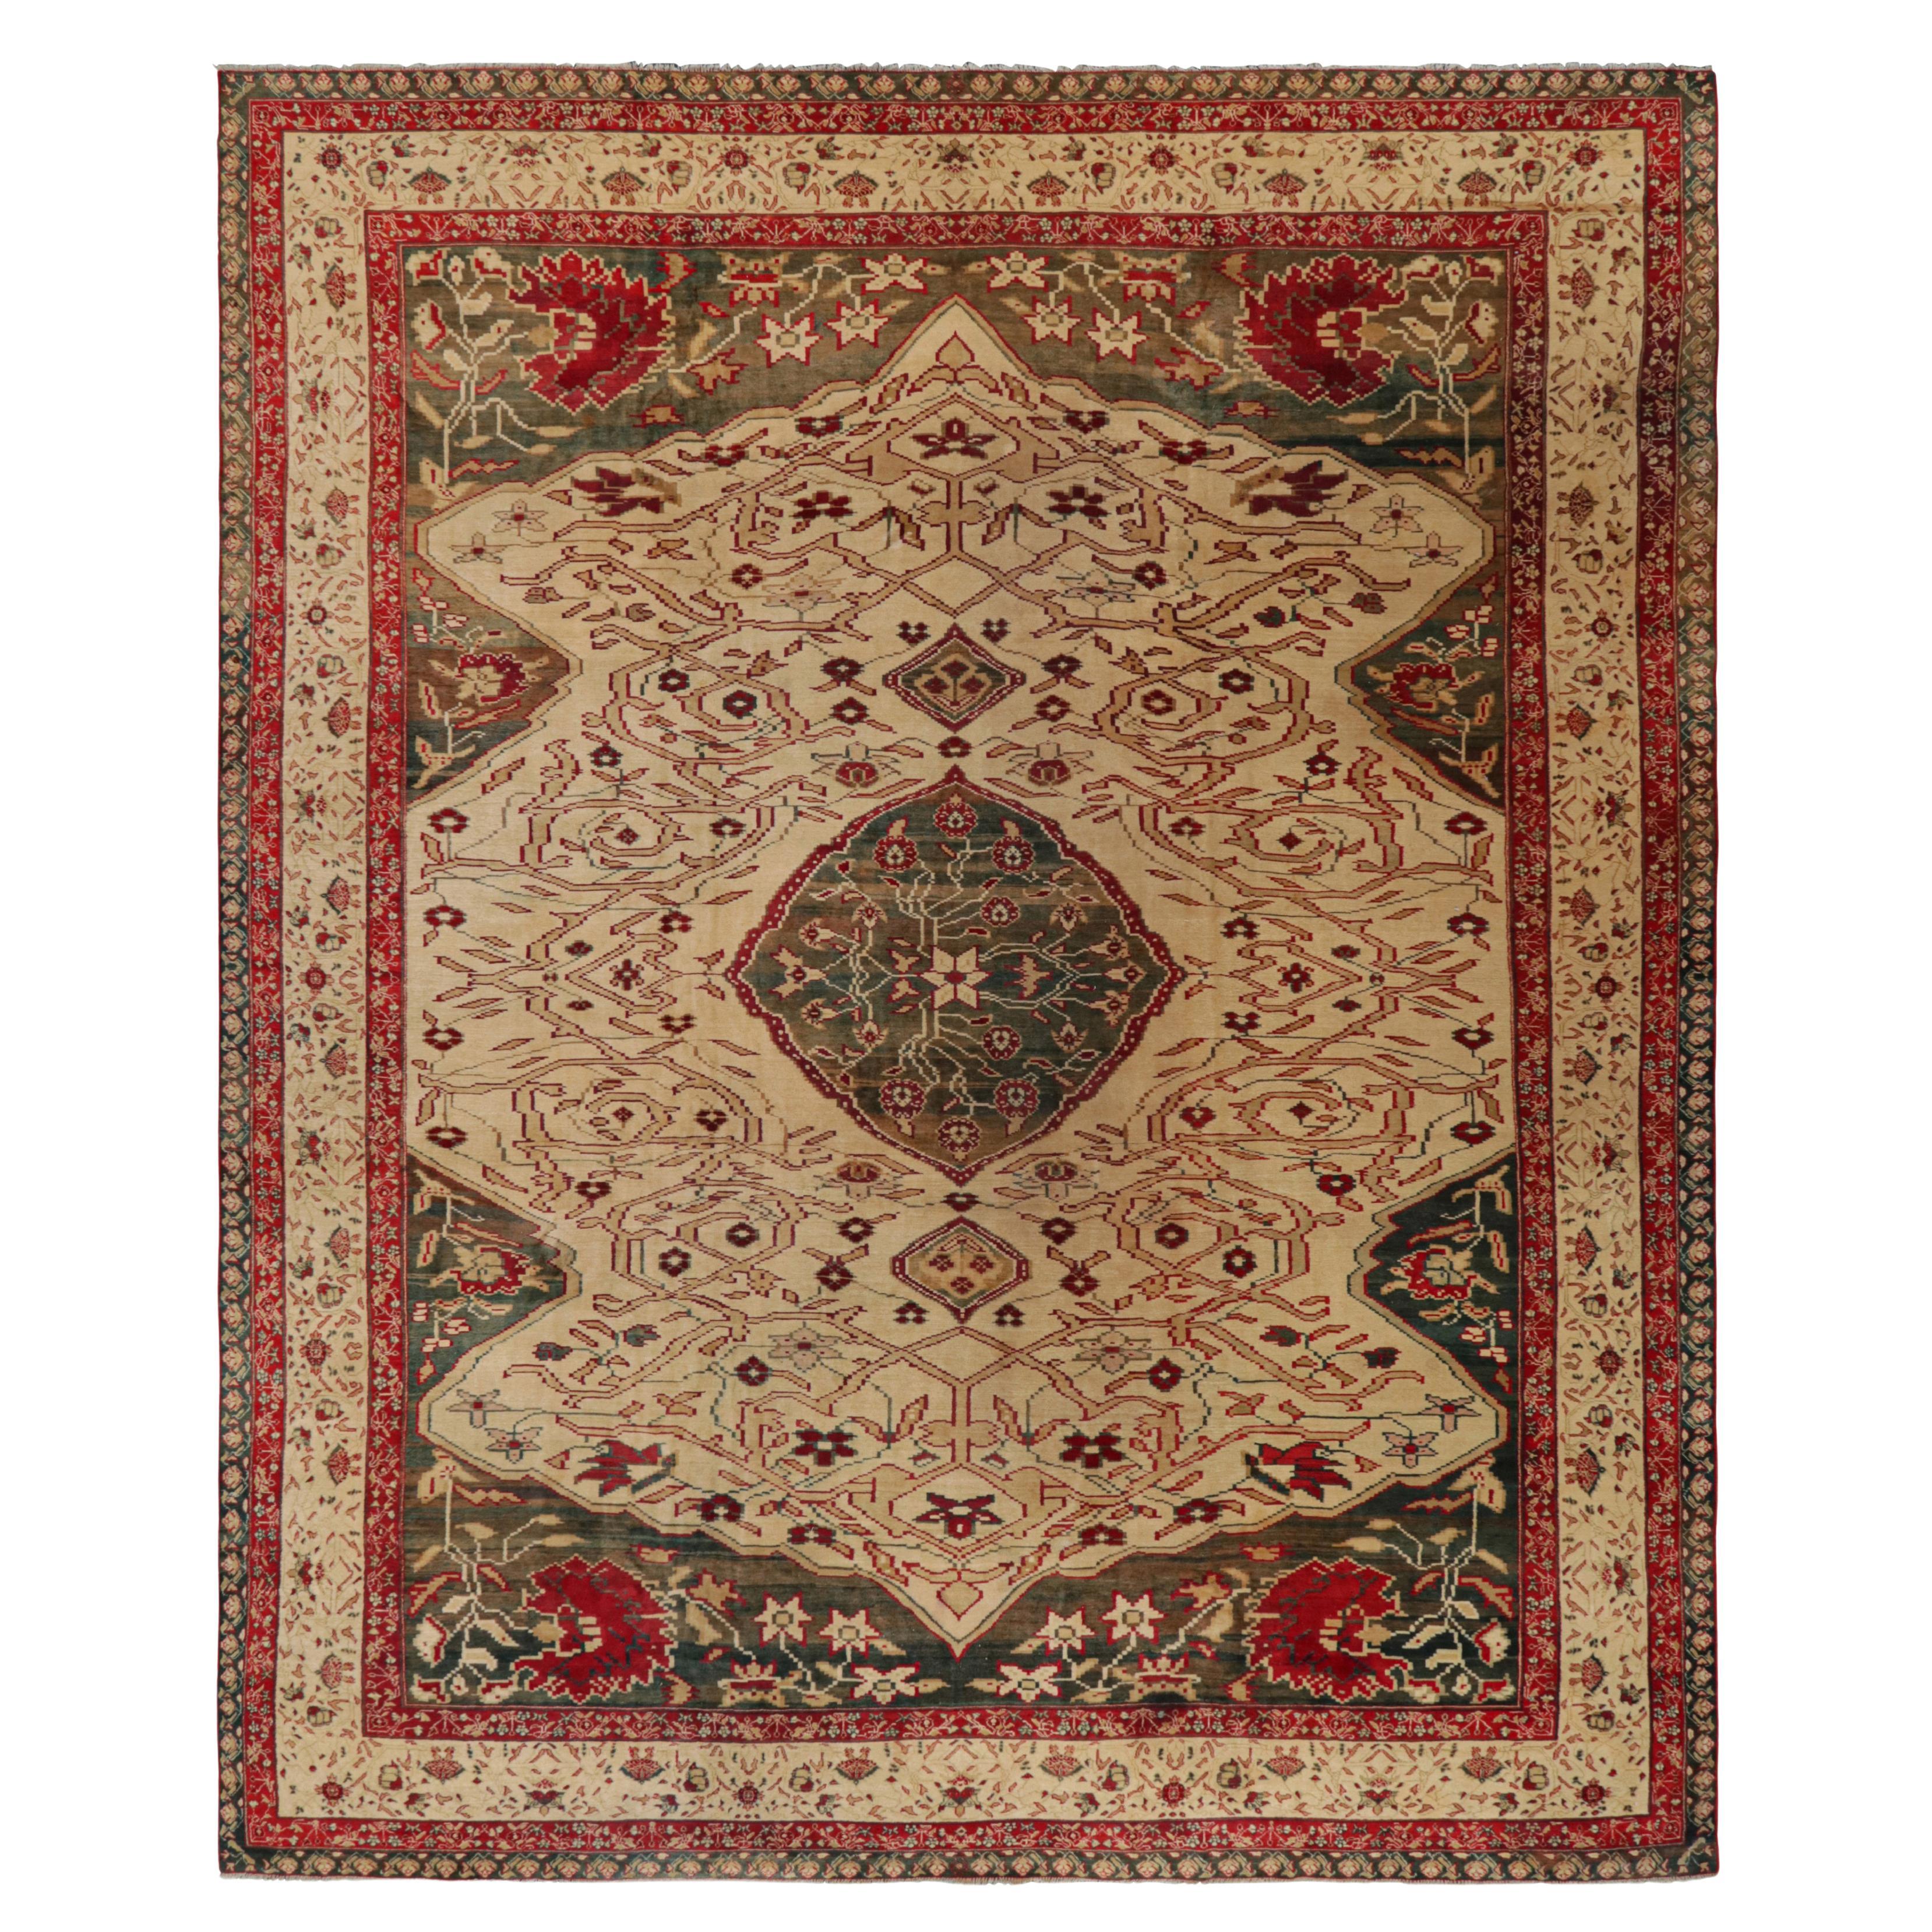 Oversized Antique Agra Jail Rug with Medallion and Florals